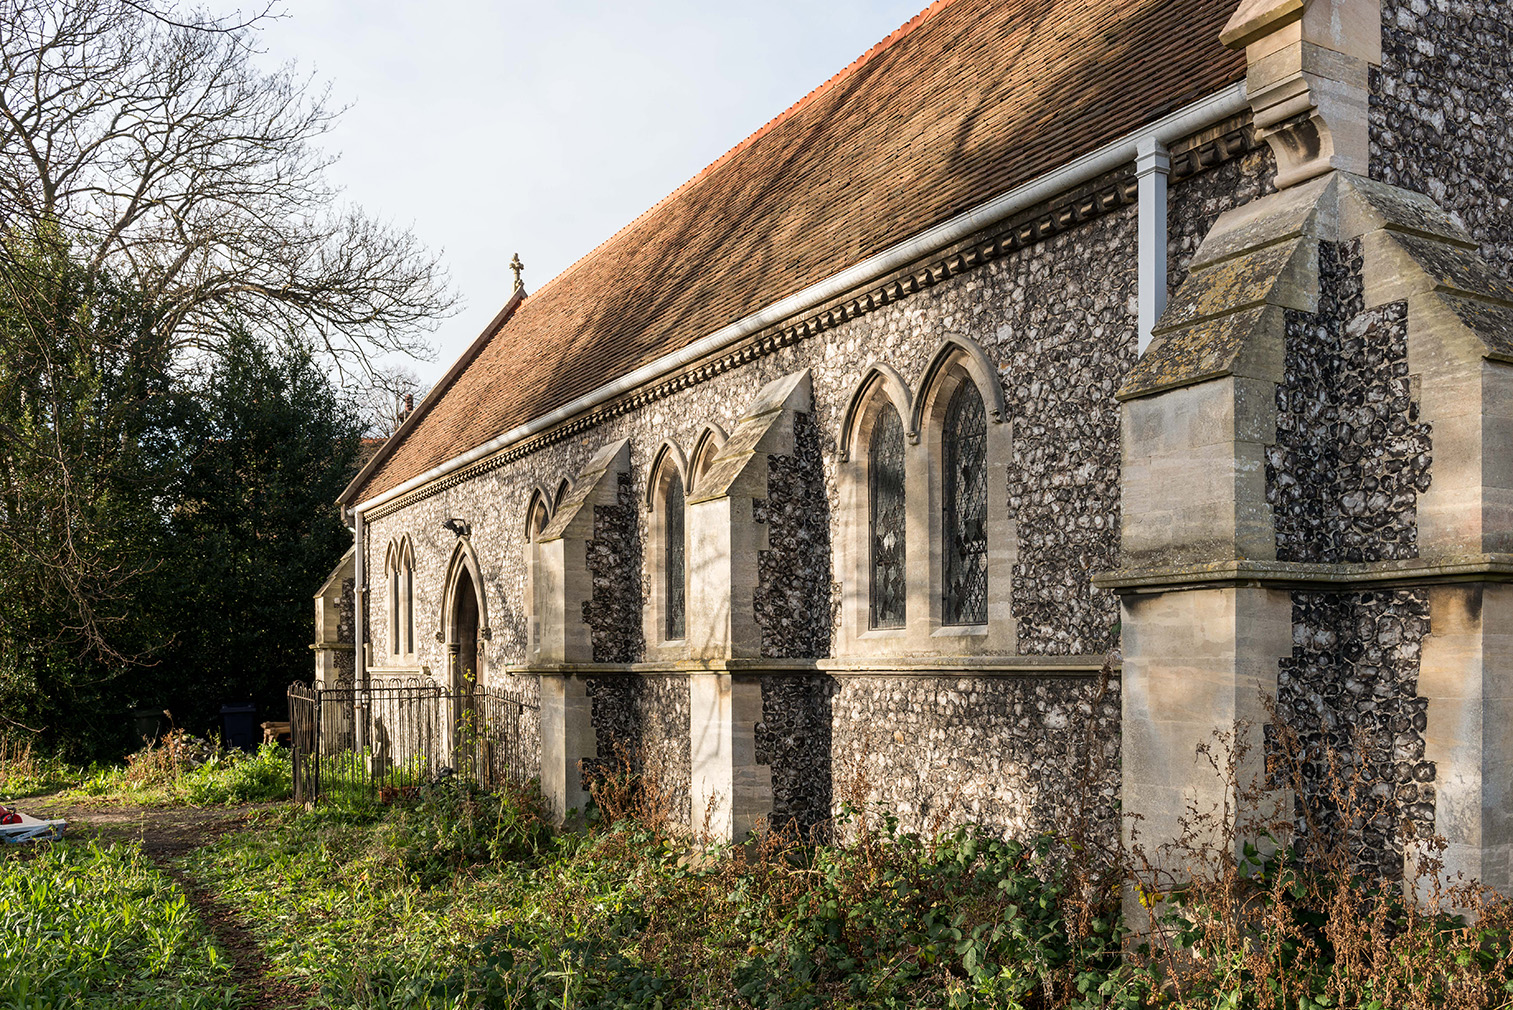 Go inside a dramatic Gothic church conversion in the UK’s Kent countryside